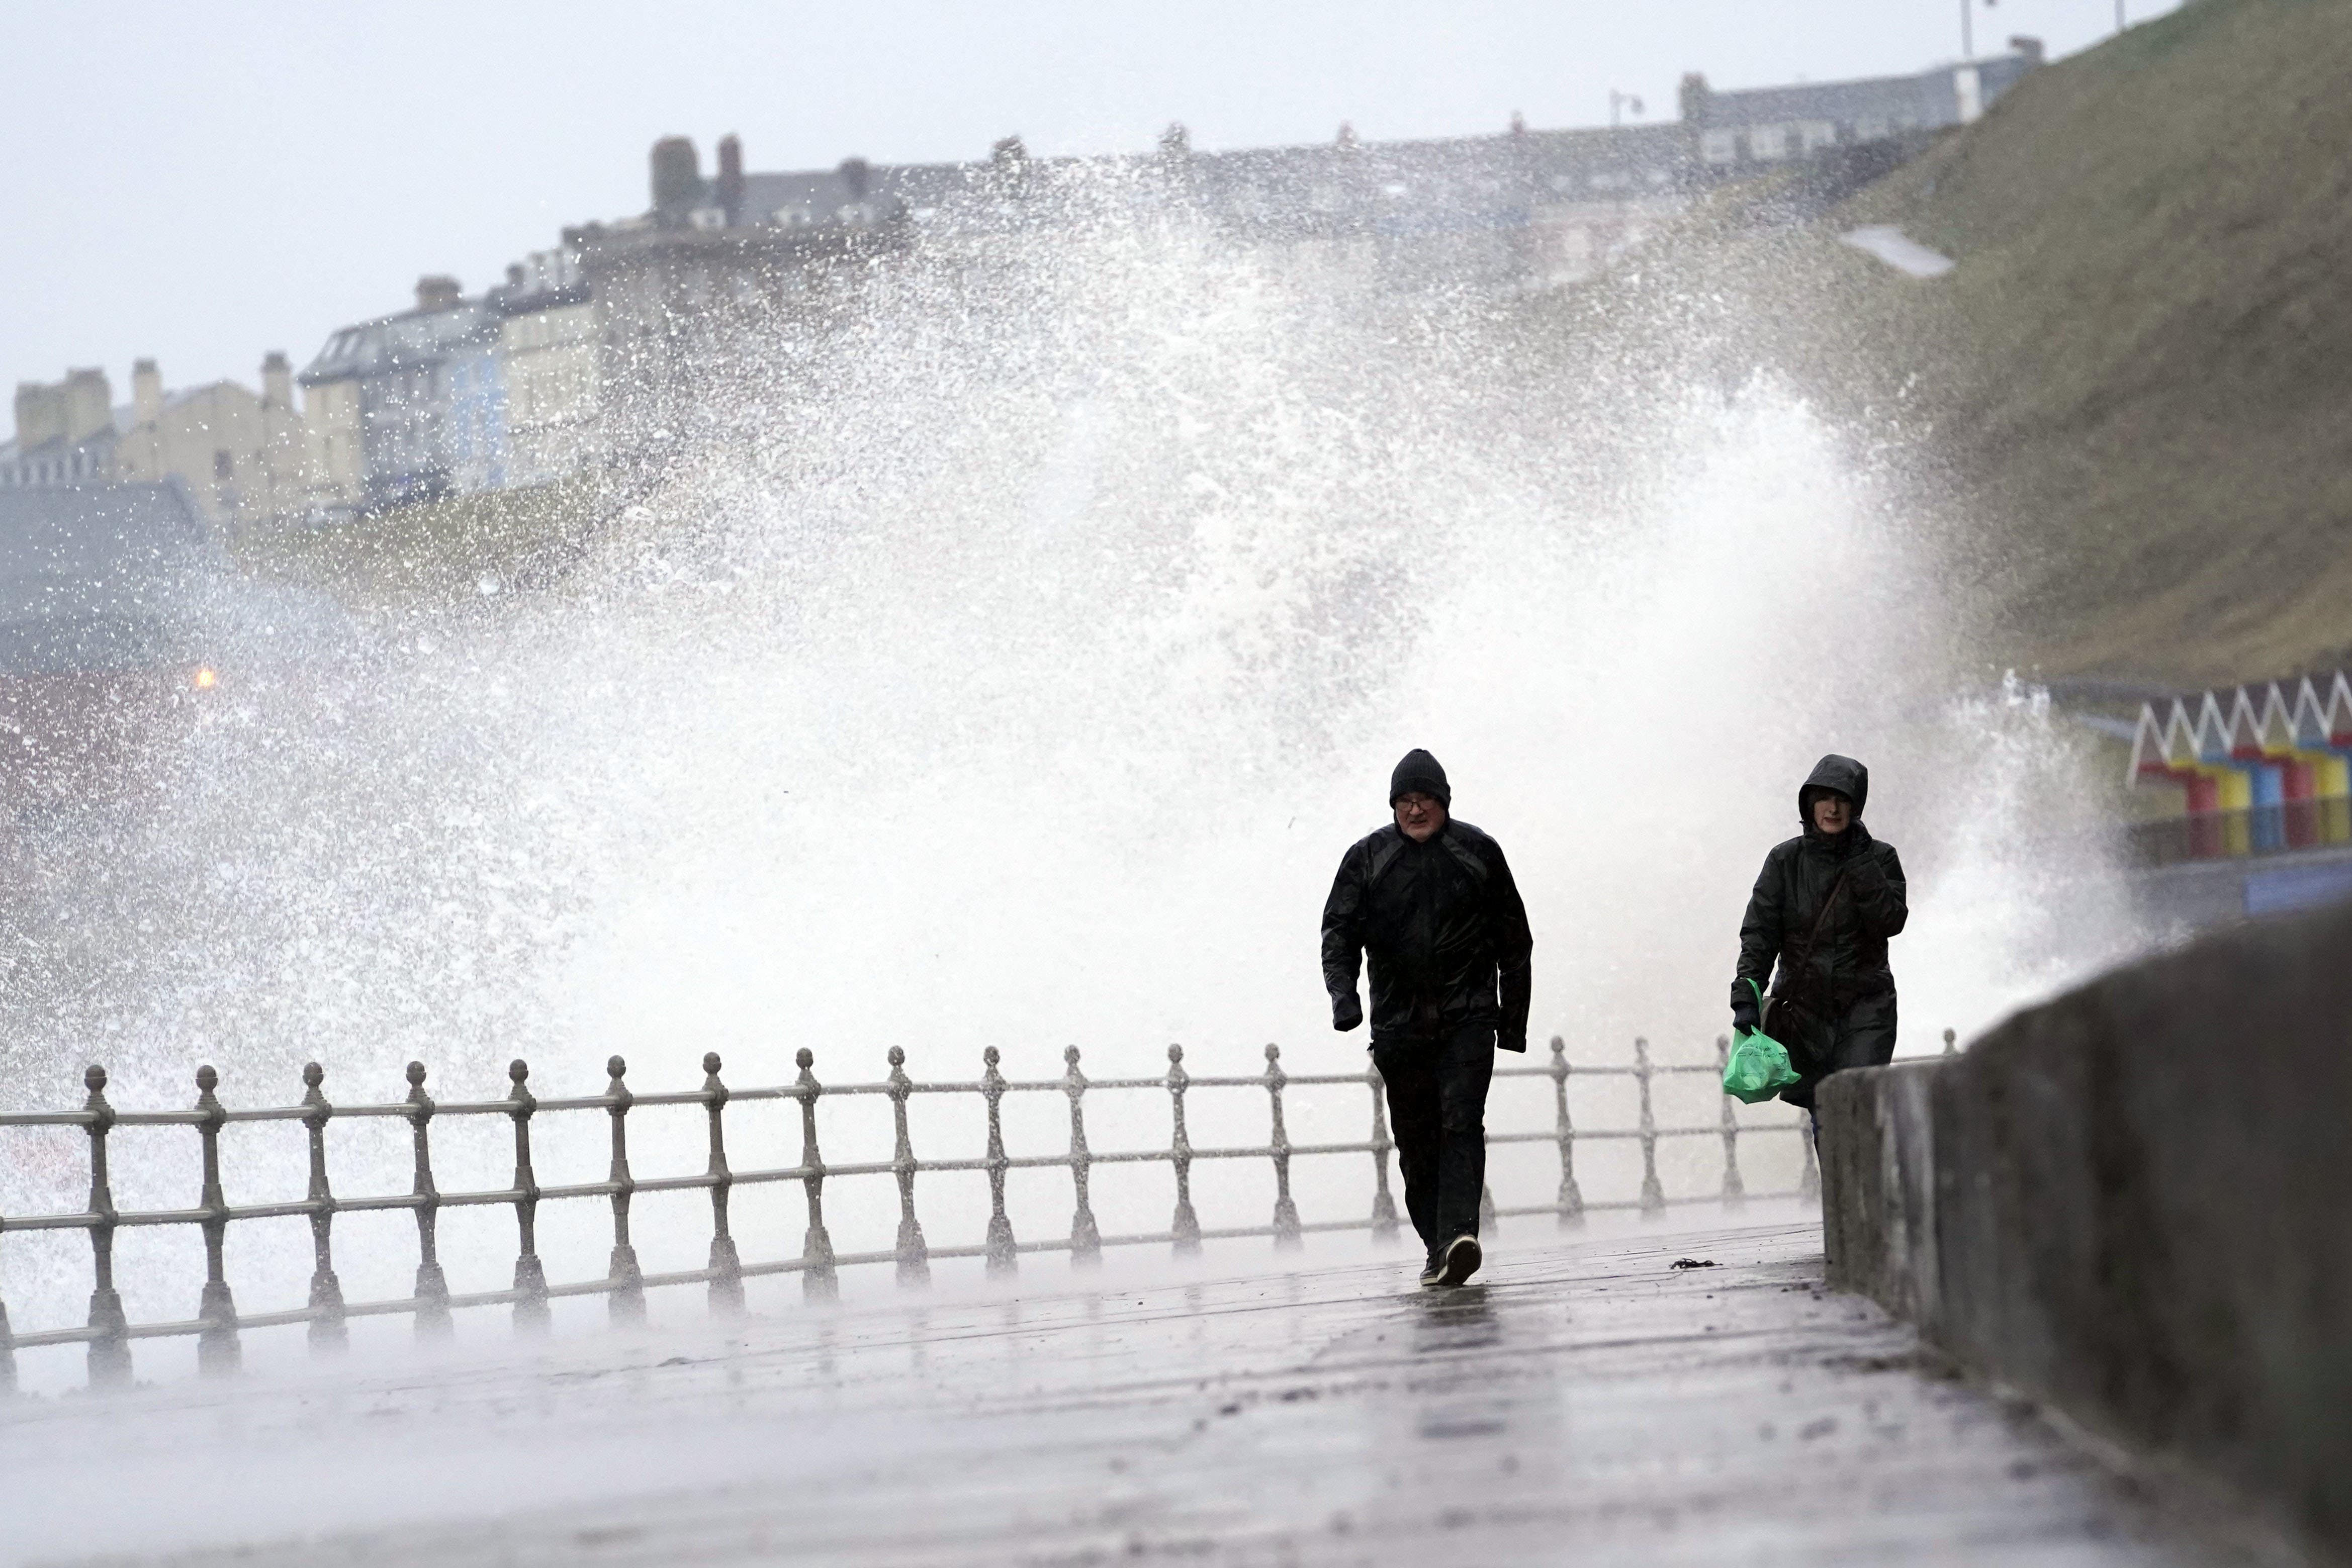 Big waves in Whitby ahead of Storm Dudley in 2022. The average price paid for home insurance in the first quarter of 2023 was £315, up 6% on the same quarter last year, according to the Association of British Insurers (Danny Lawson/PA)